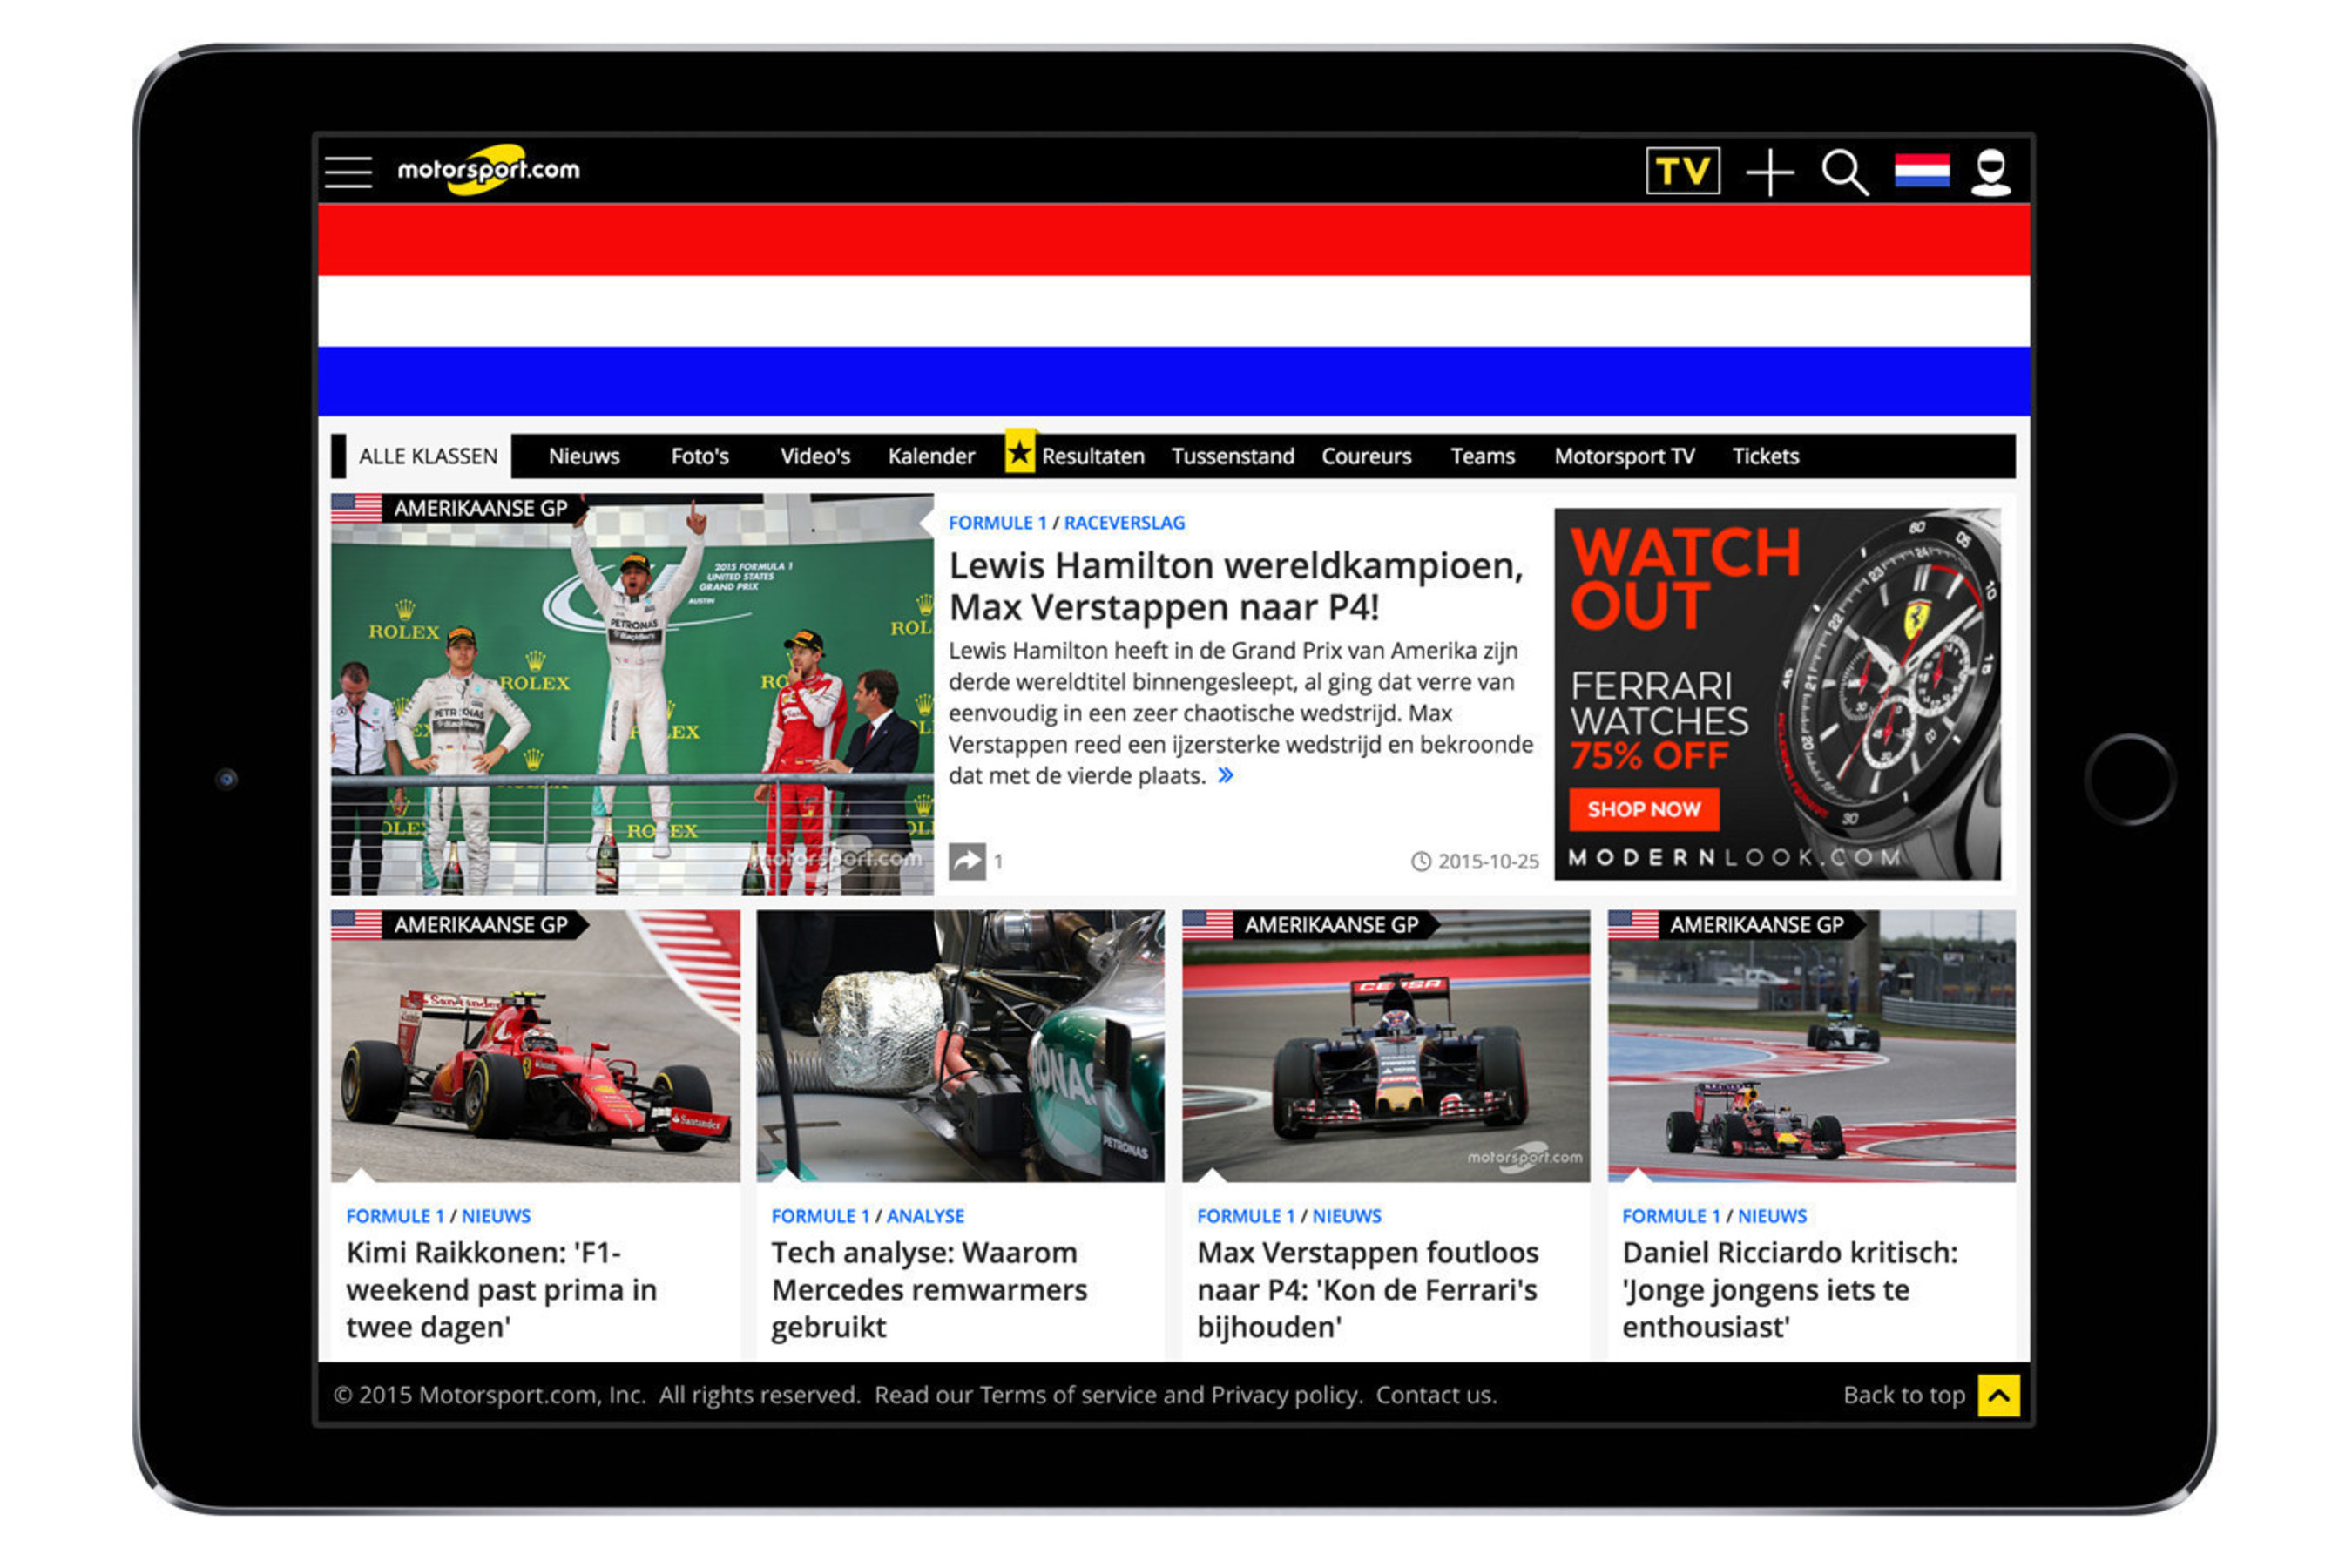 Motorsport.com today announced that it has expanded into the Netherlands with the Dutch-speciifc digital platform, Motorsport.com - NETHERLANDS.